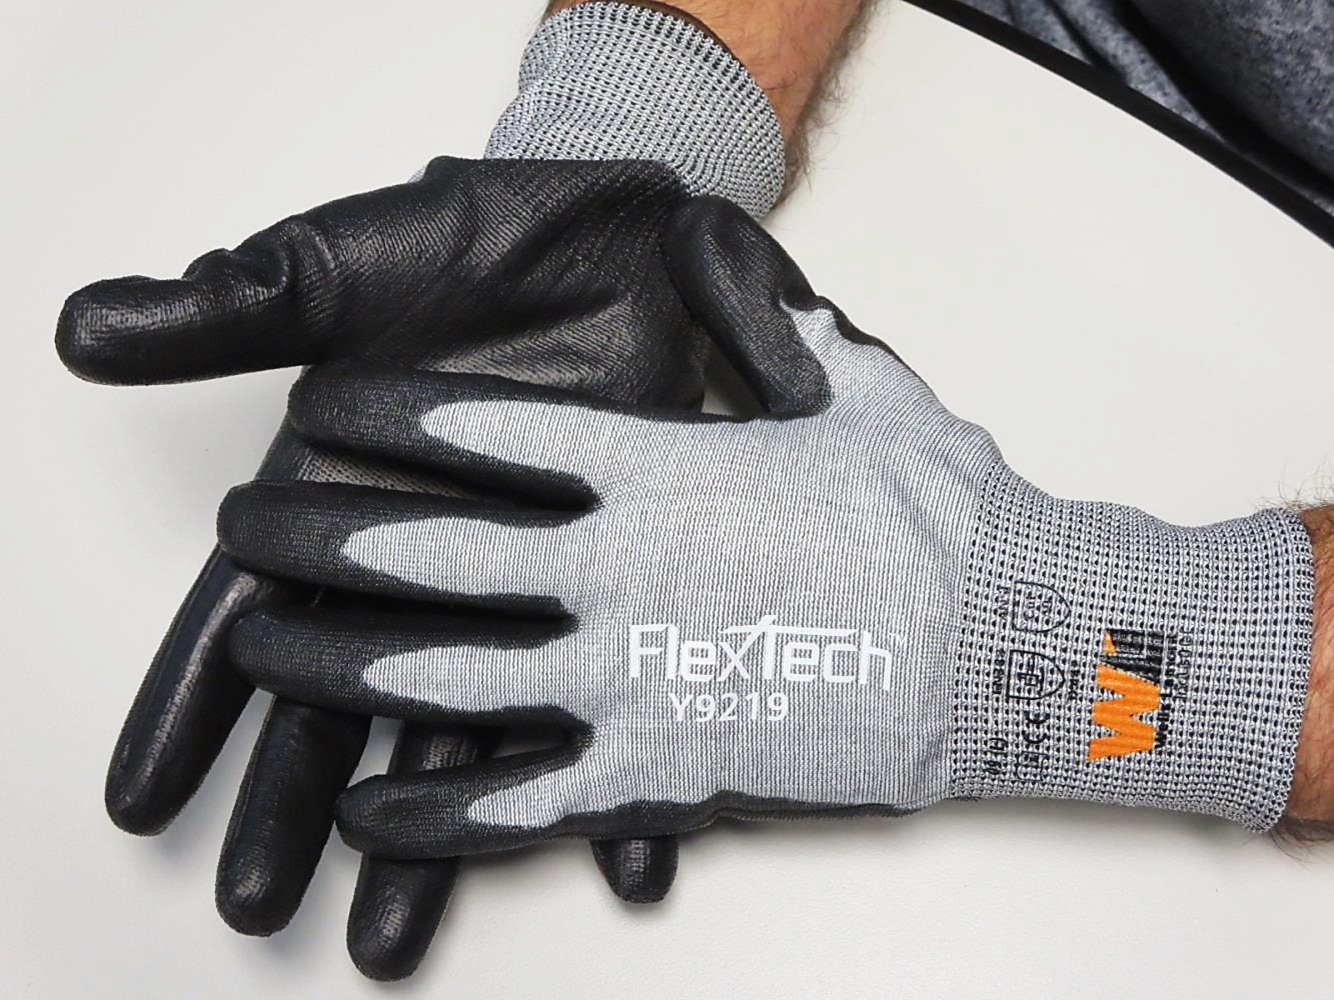 Wells Lamont Y9219 FlexTech™ PU Coated A9 Extreme Cut Gloves